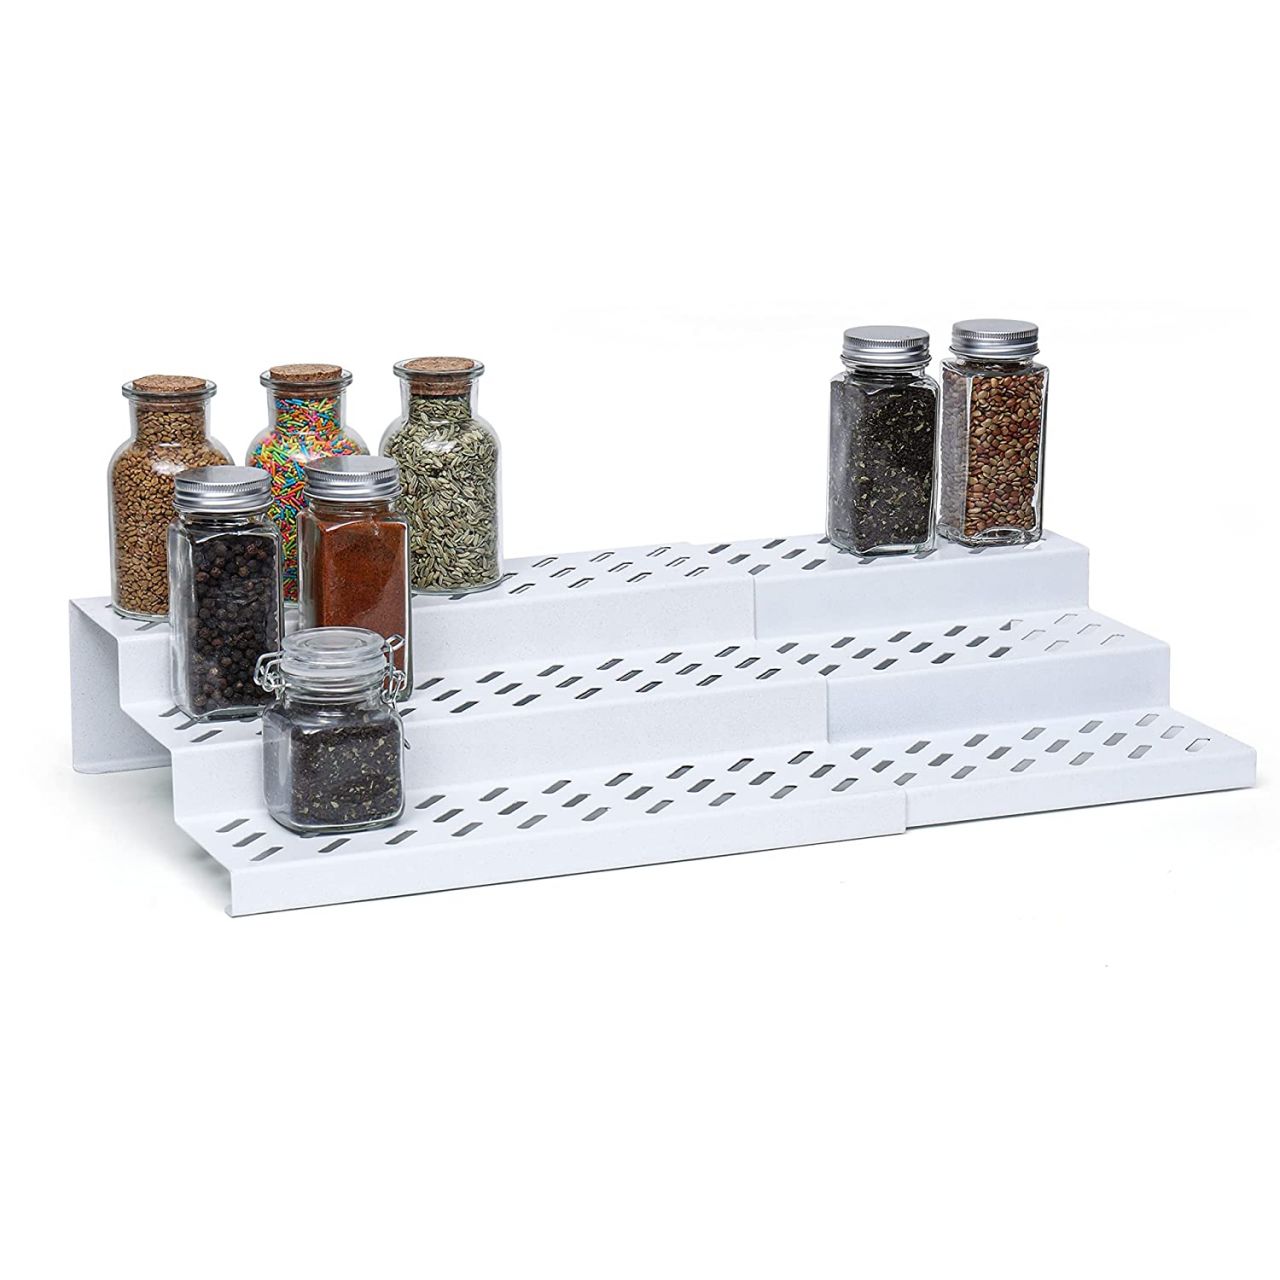 Livzing 3 Tier Expandable Spice Rack Stand â White â Expands 12.2 To 21.6